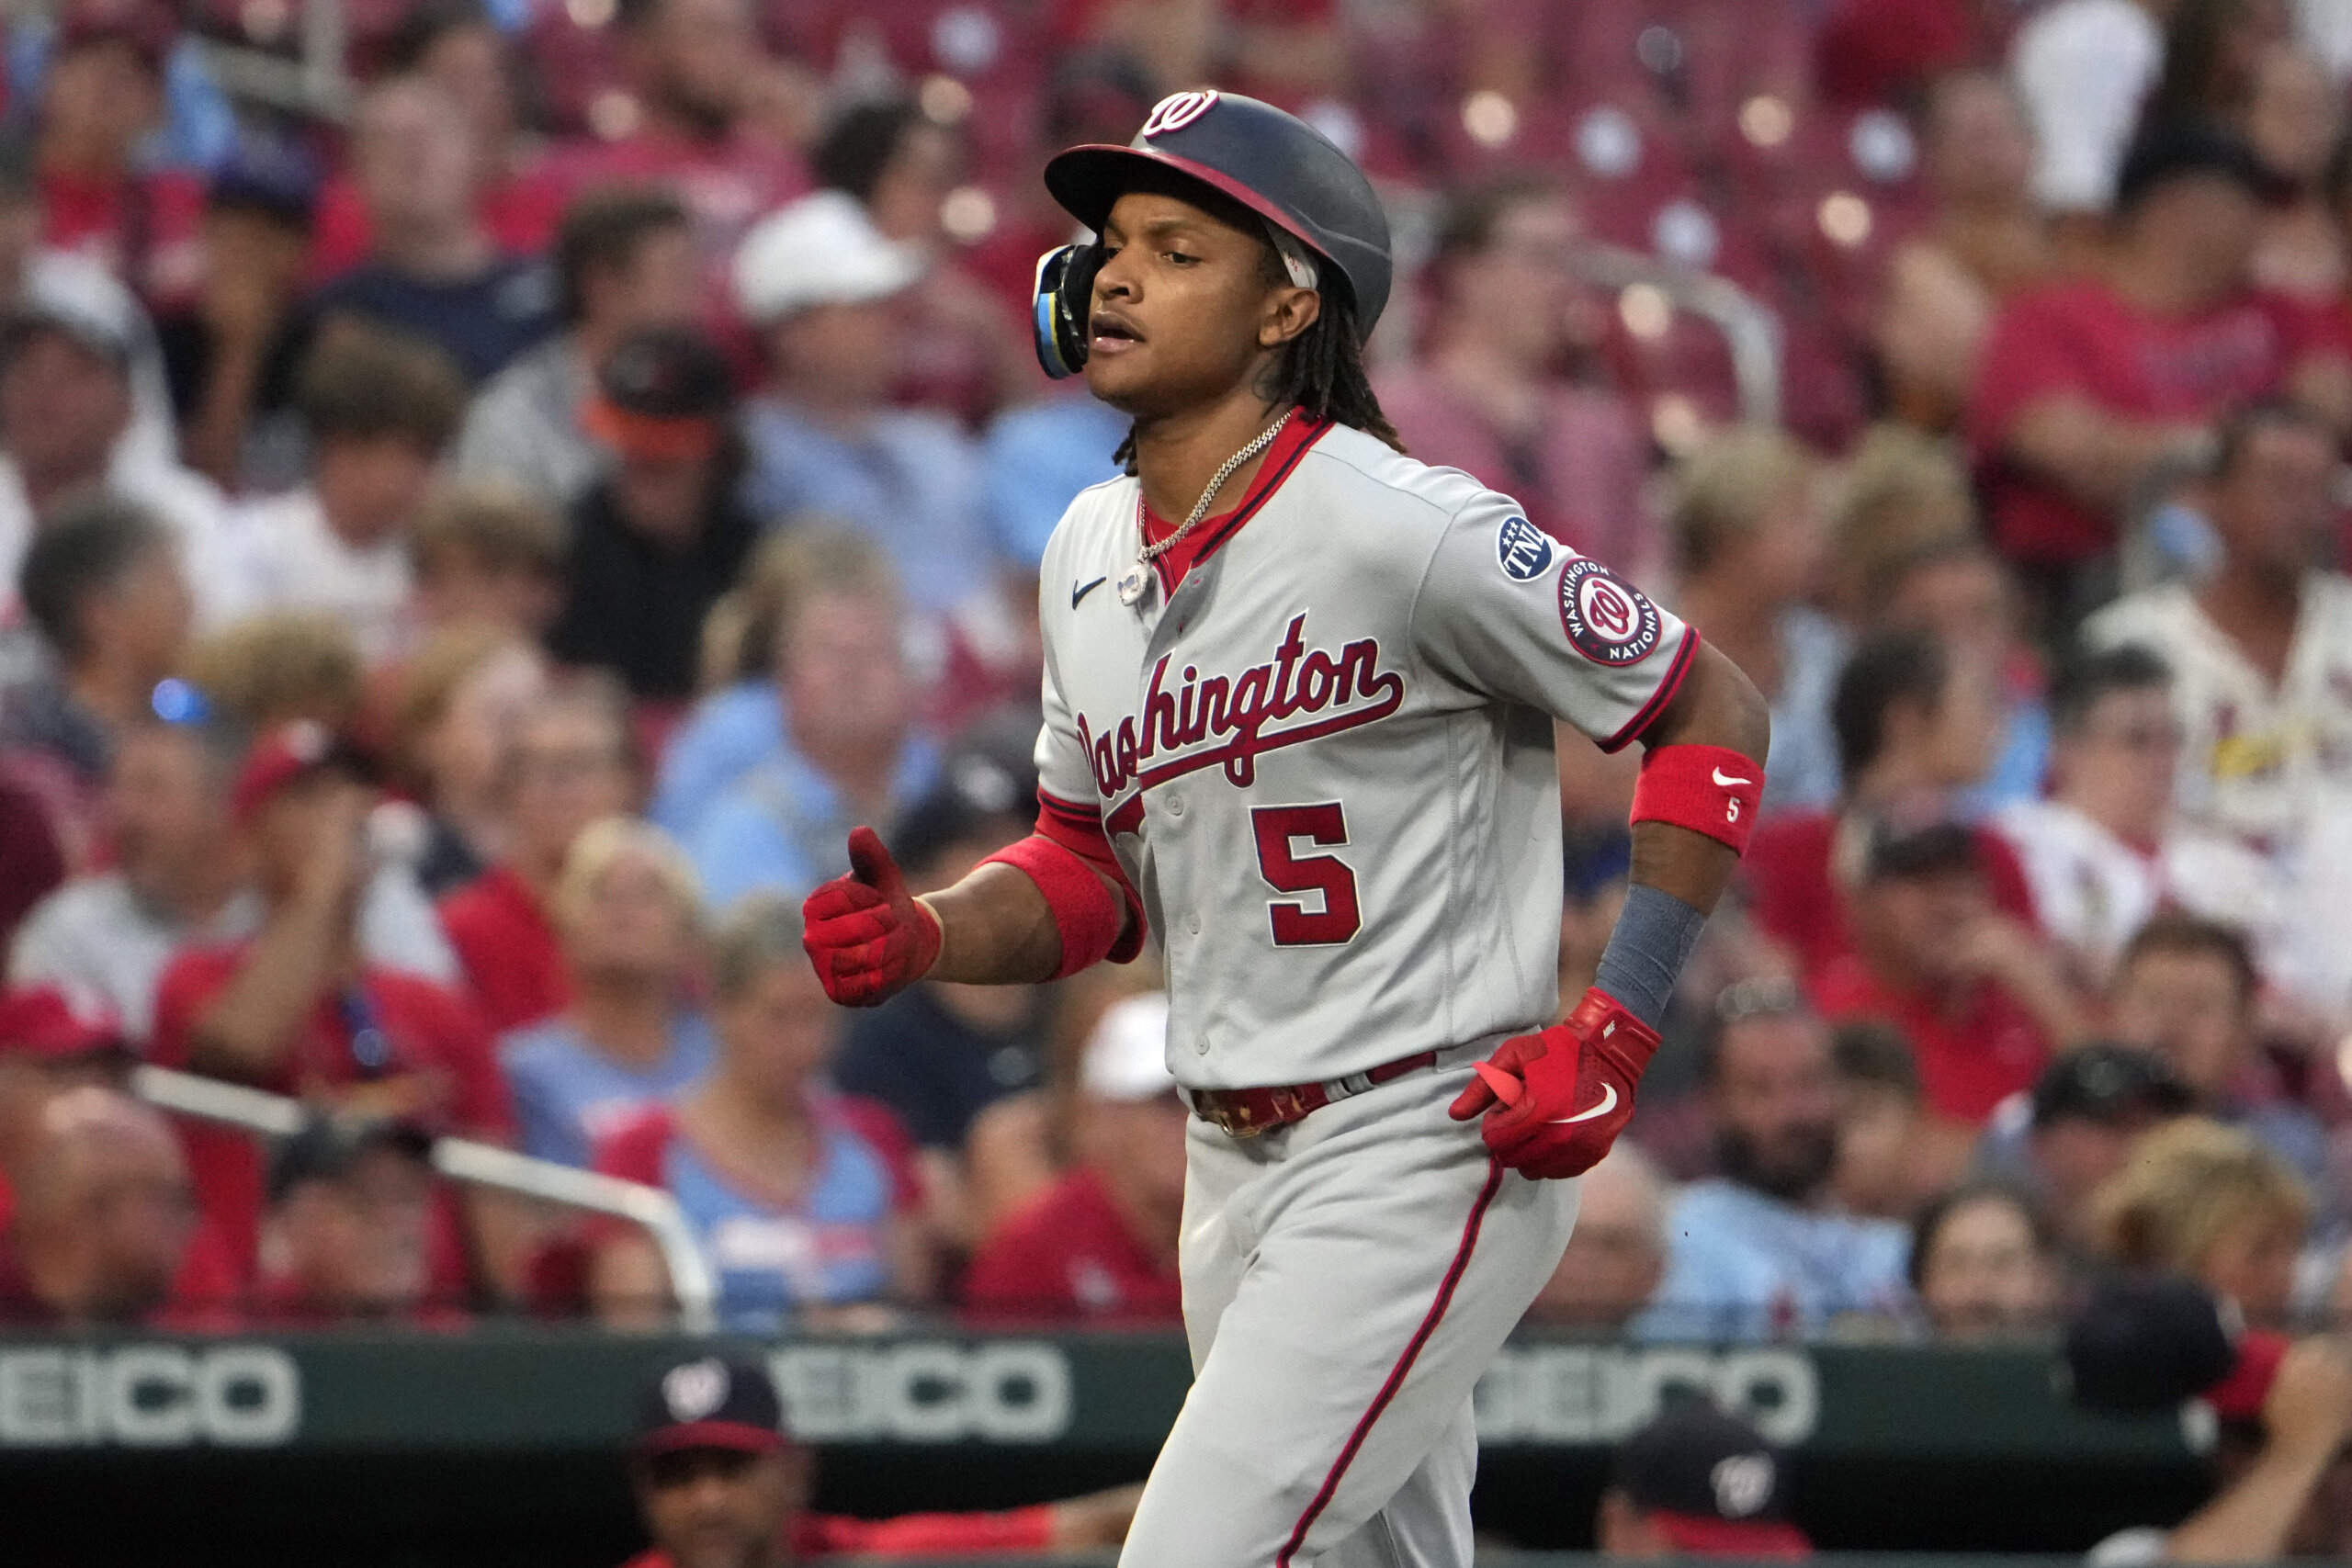 CJ Abrams made mental mistake in the Nationals' game against the Mets - The  Washington Post